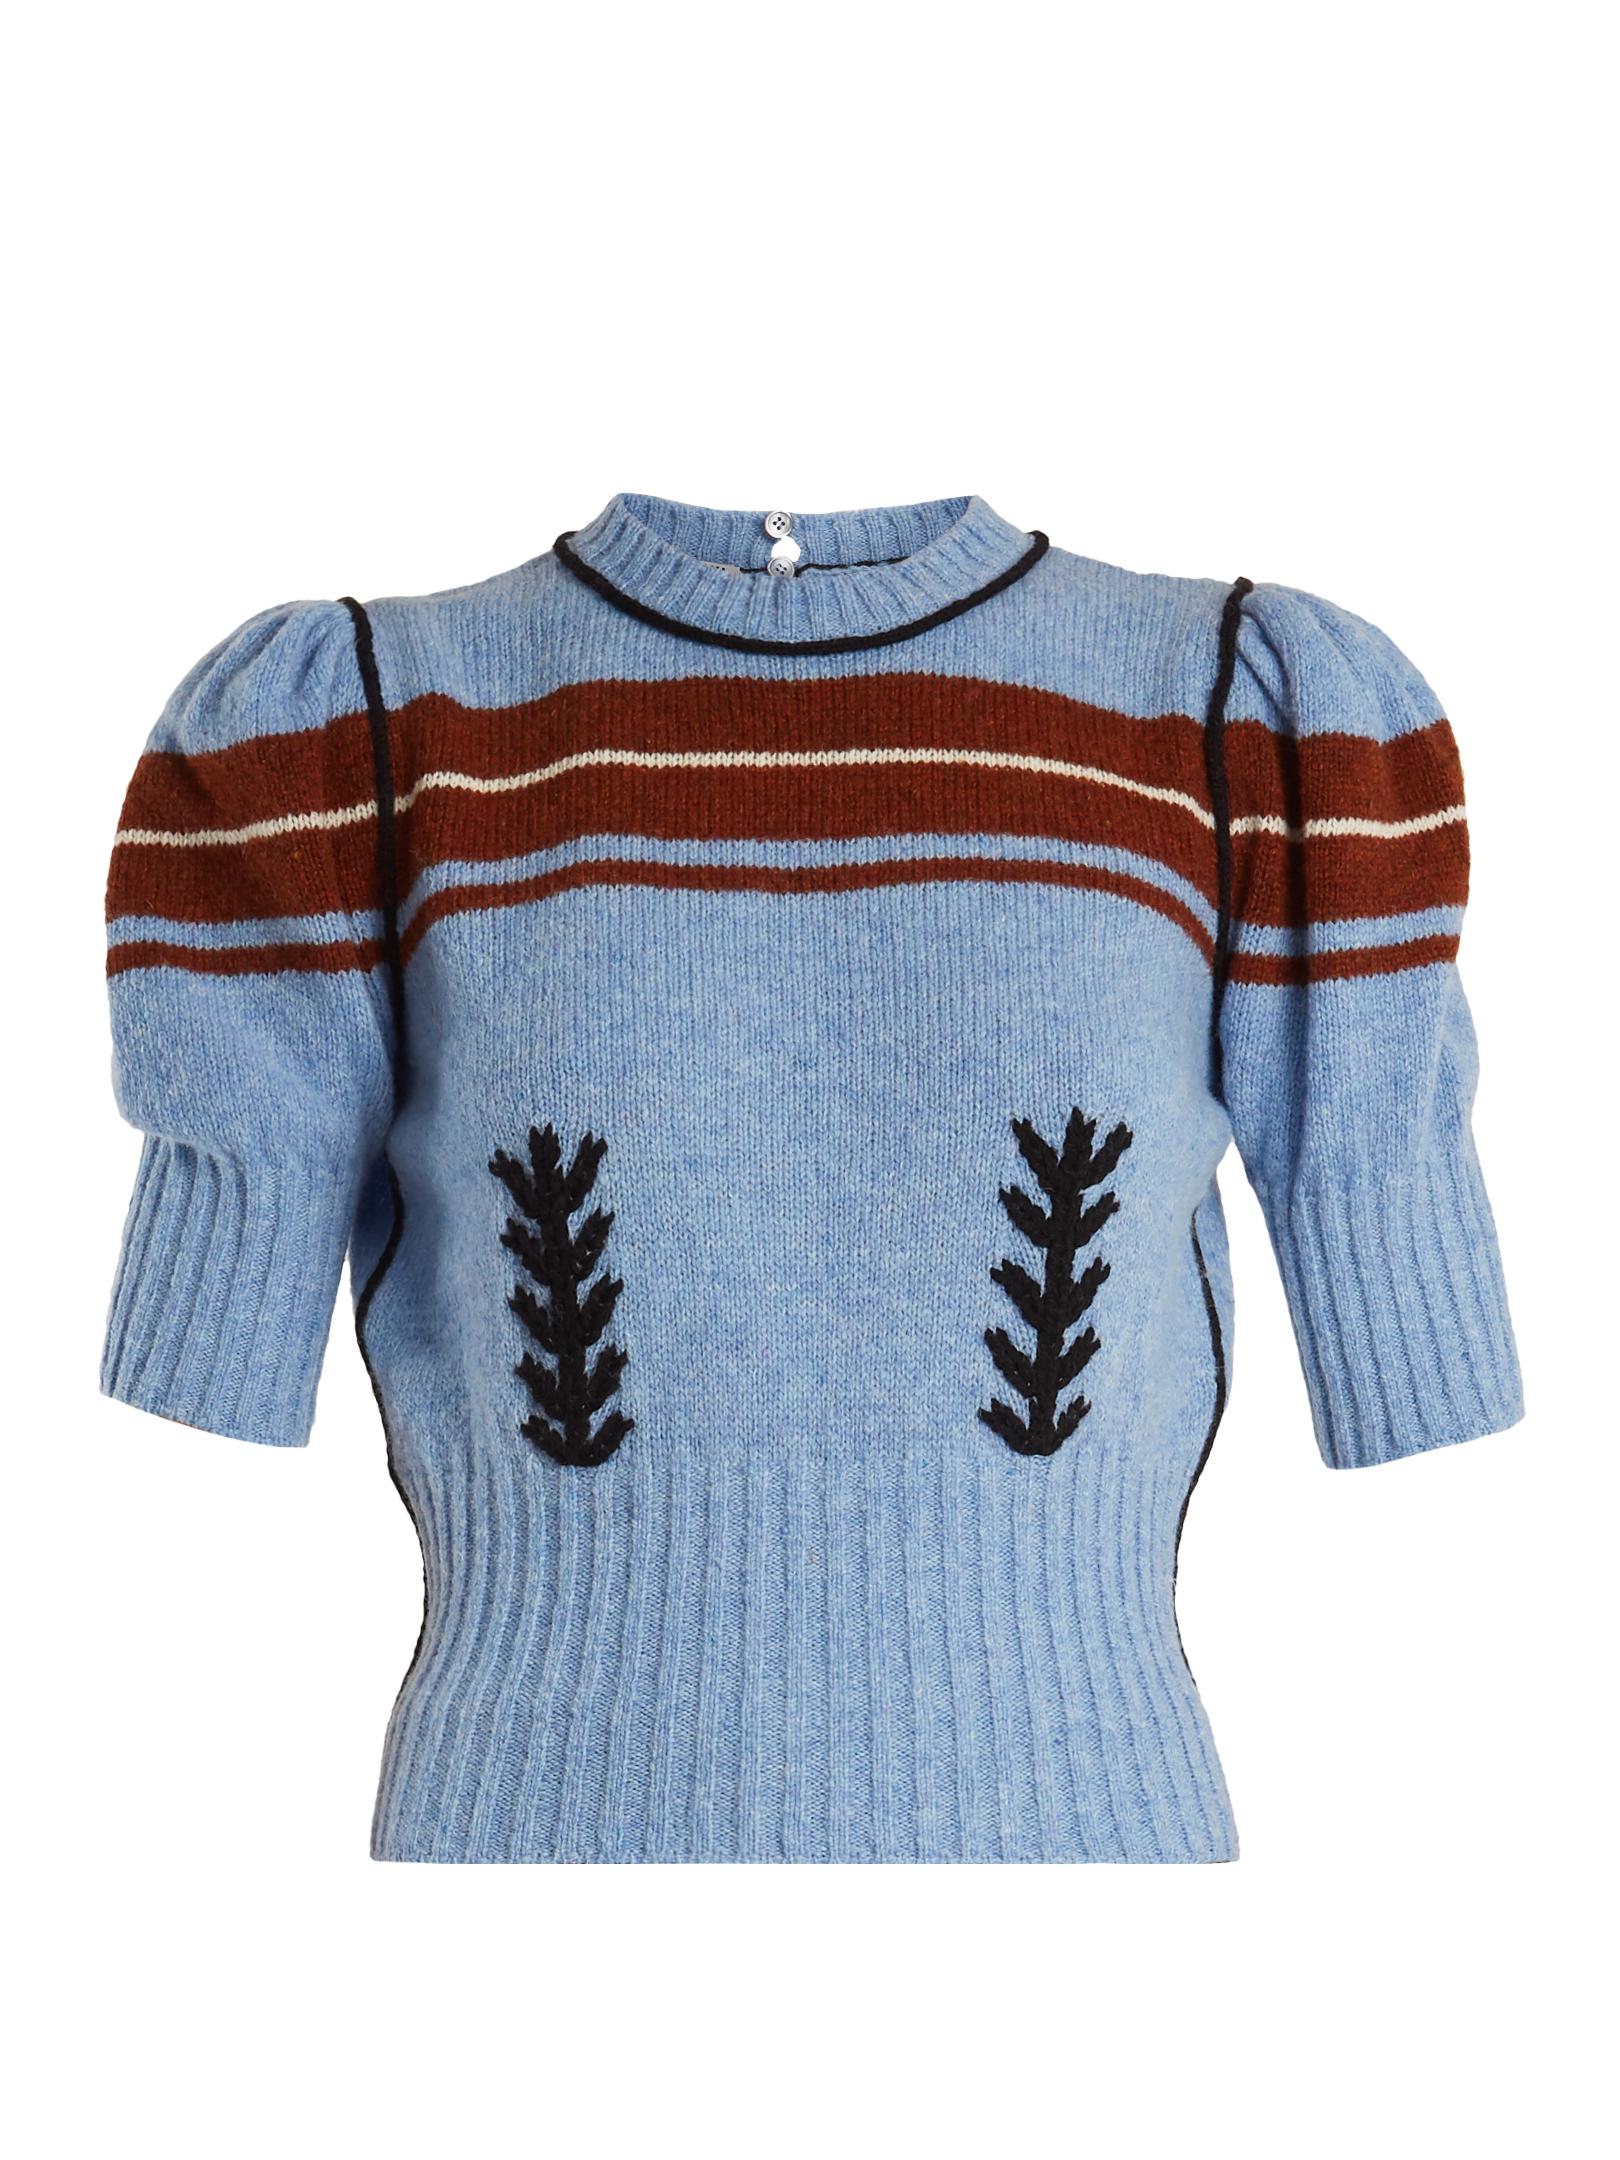 Miu Miu Embroidered And Striped-intarsia Wool Knit Sweater in Blue - Lyst